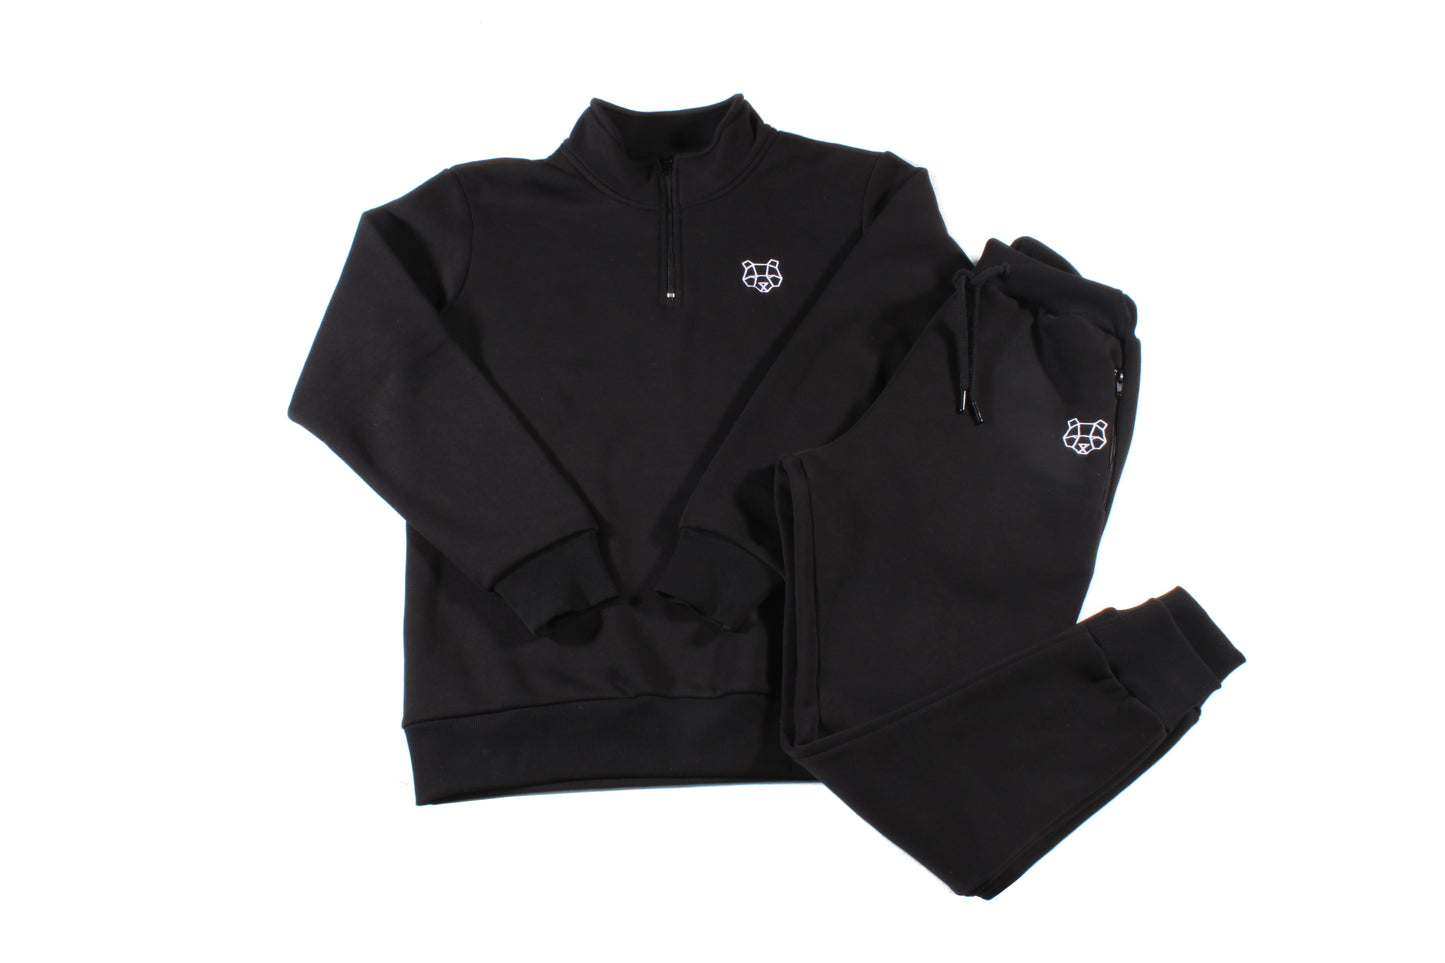 Storm Collection Fleece Lined Tracksuit Bottoms in Black